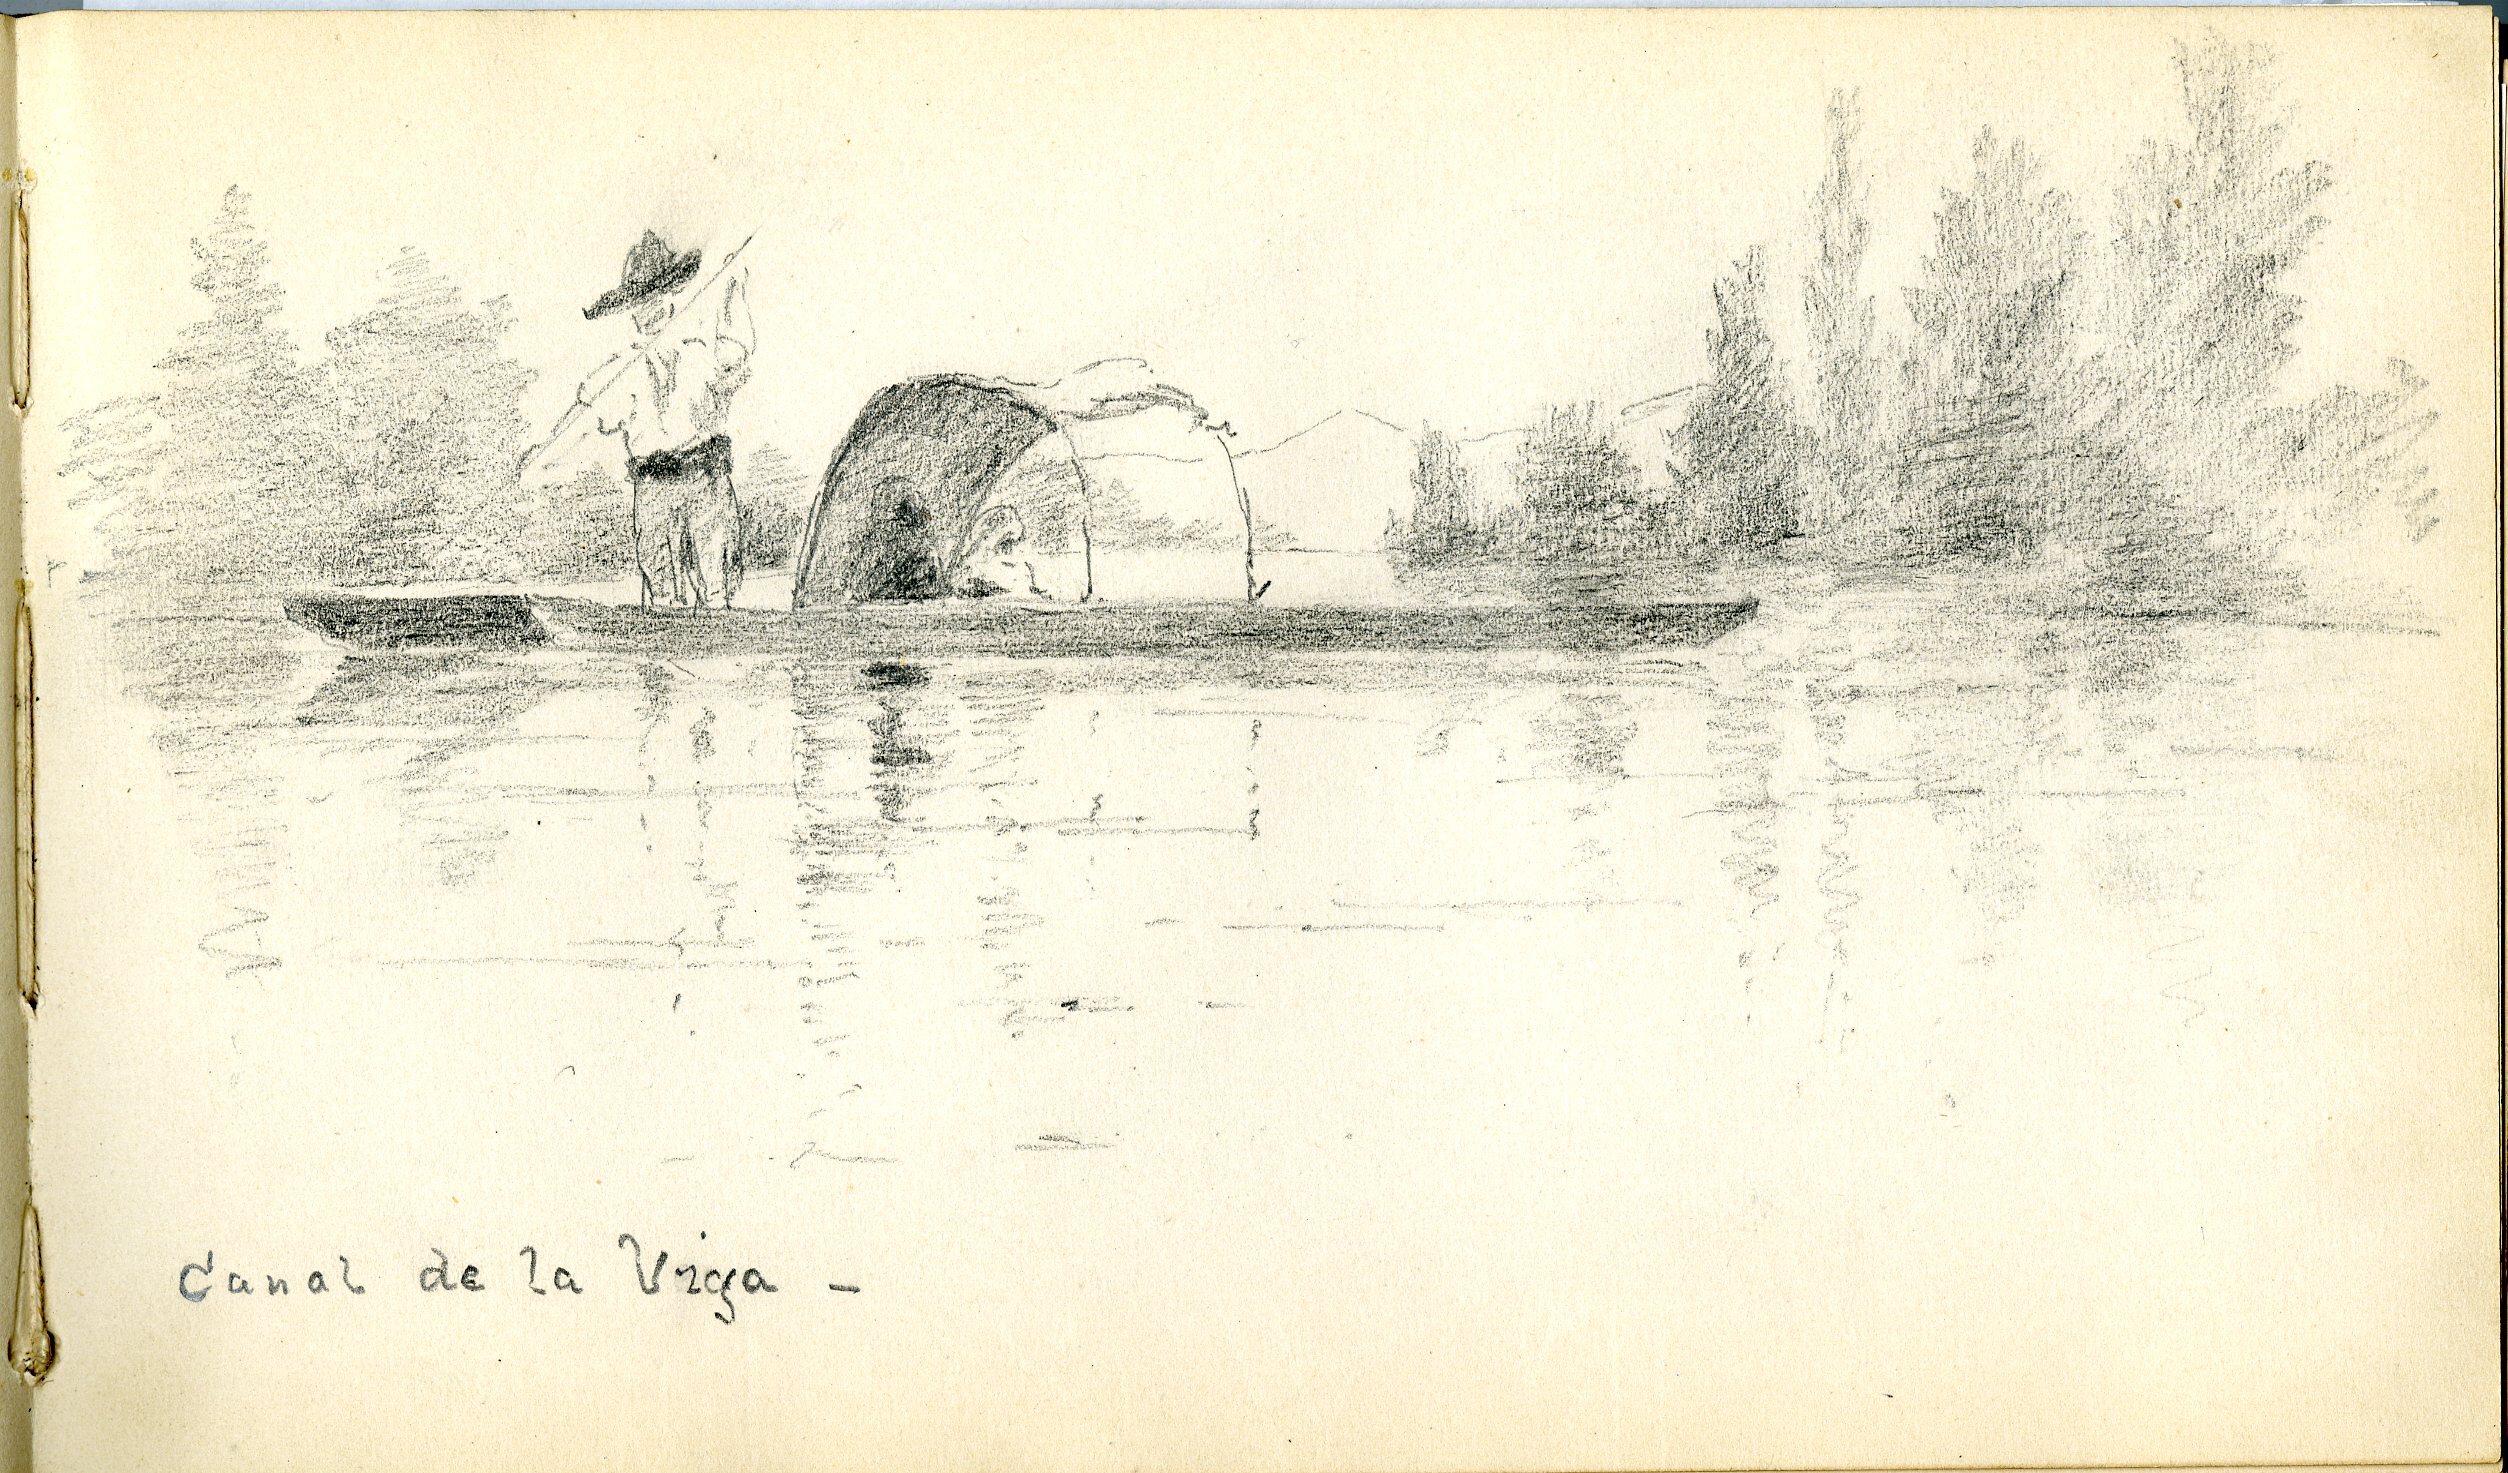 Charcoal drawing of a small boat with person sitting under arched shade, pushed by a man with a pole.